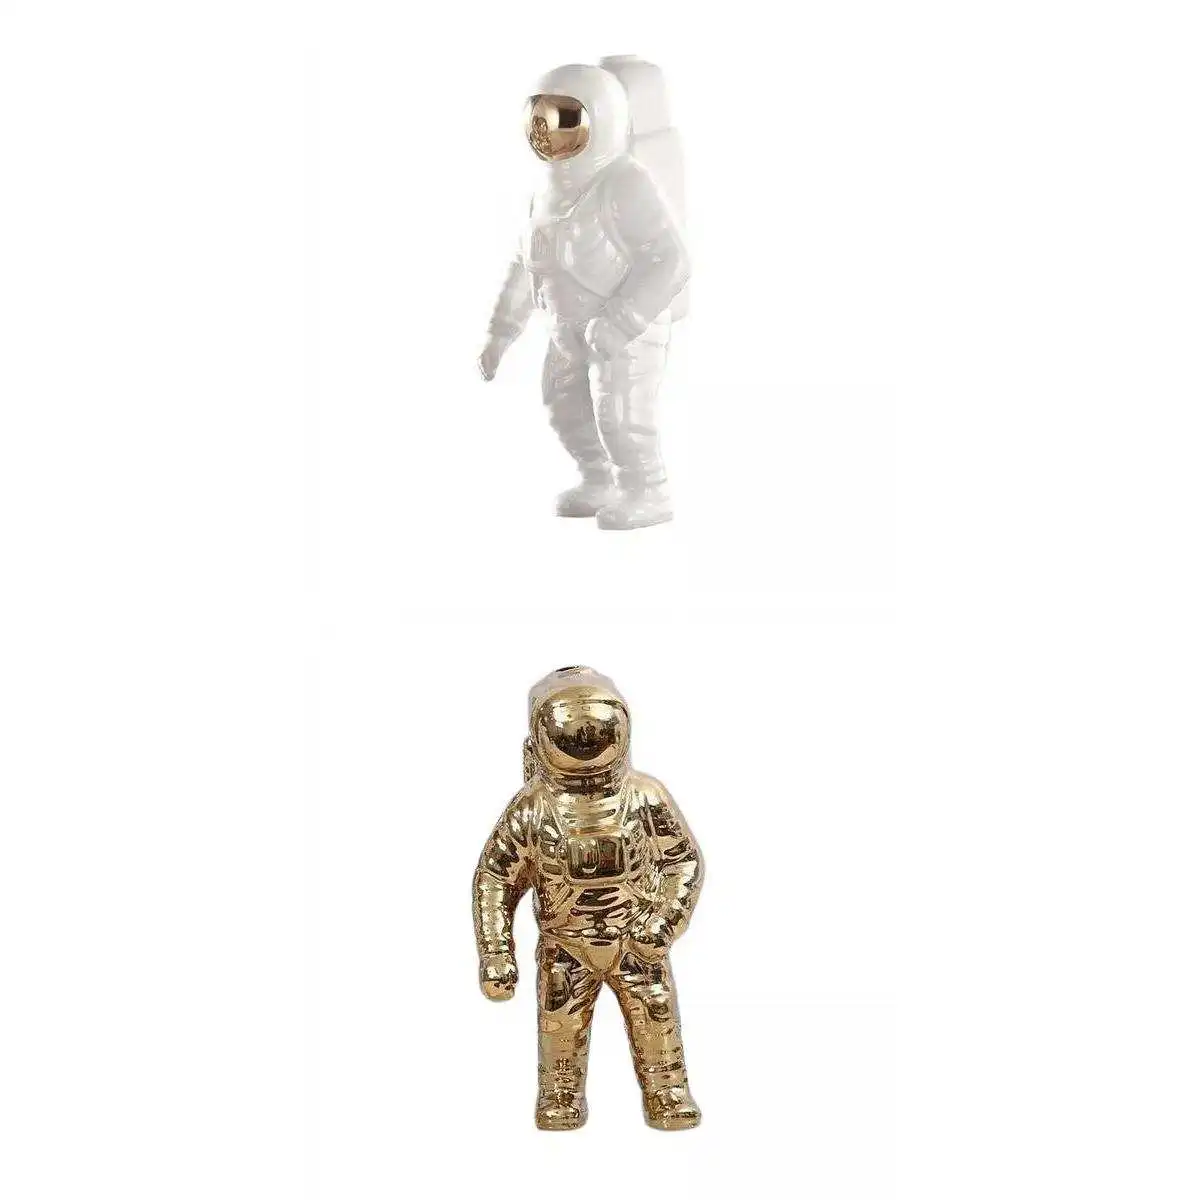 2x Creative Astronaut Model Statue Sculpture Figurine Outer Space Gifts Toy for Children Shelf Bedroom